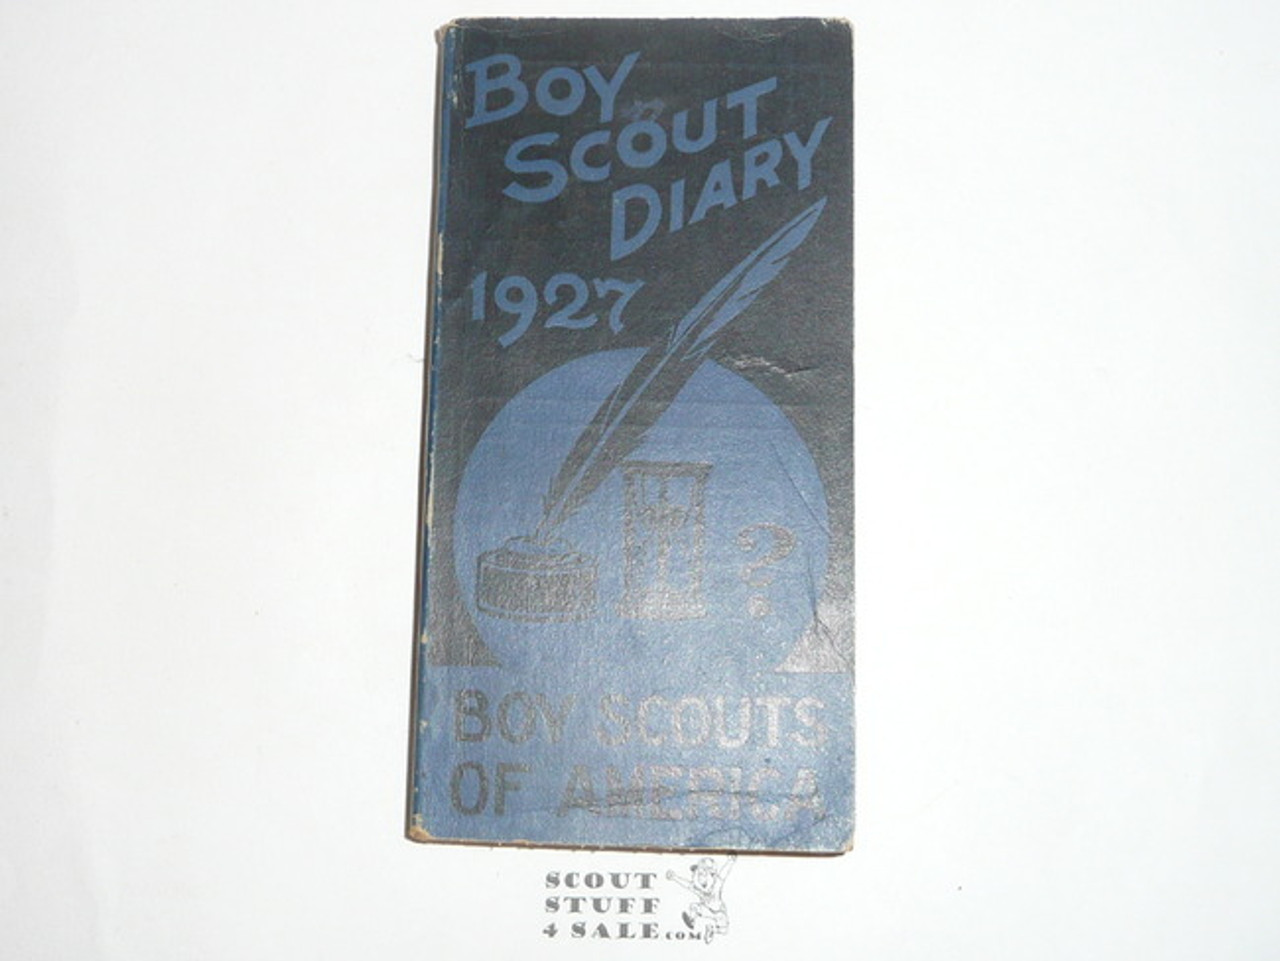 1927 Boy Scout Diary, MINT condition